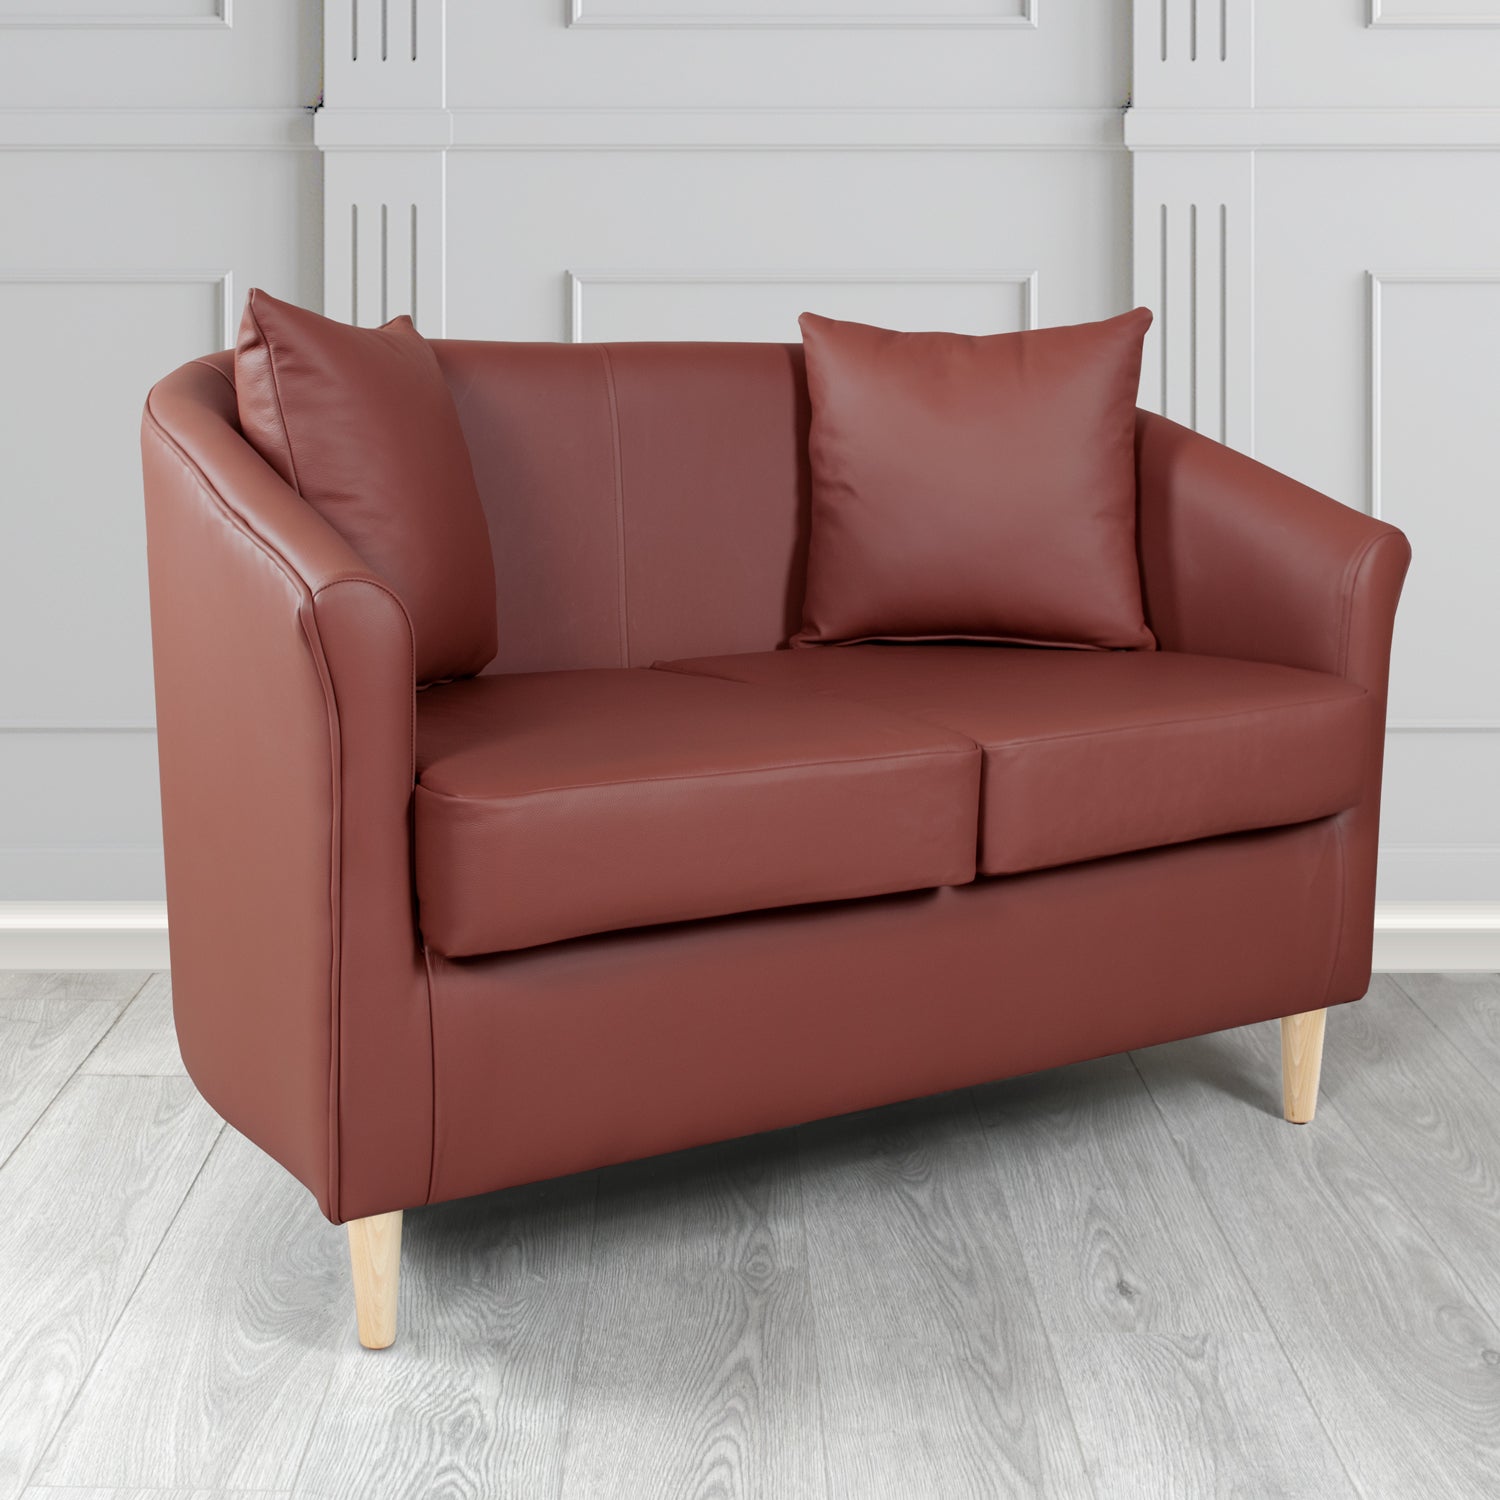 St Tropez Shelly Dark Grape Crib 5 Genuine Leather 2 Seater Tub Sofa with Scatter Cushions - The Tub Chair Shop